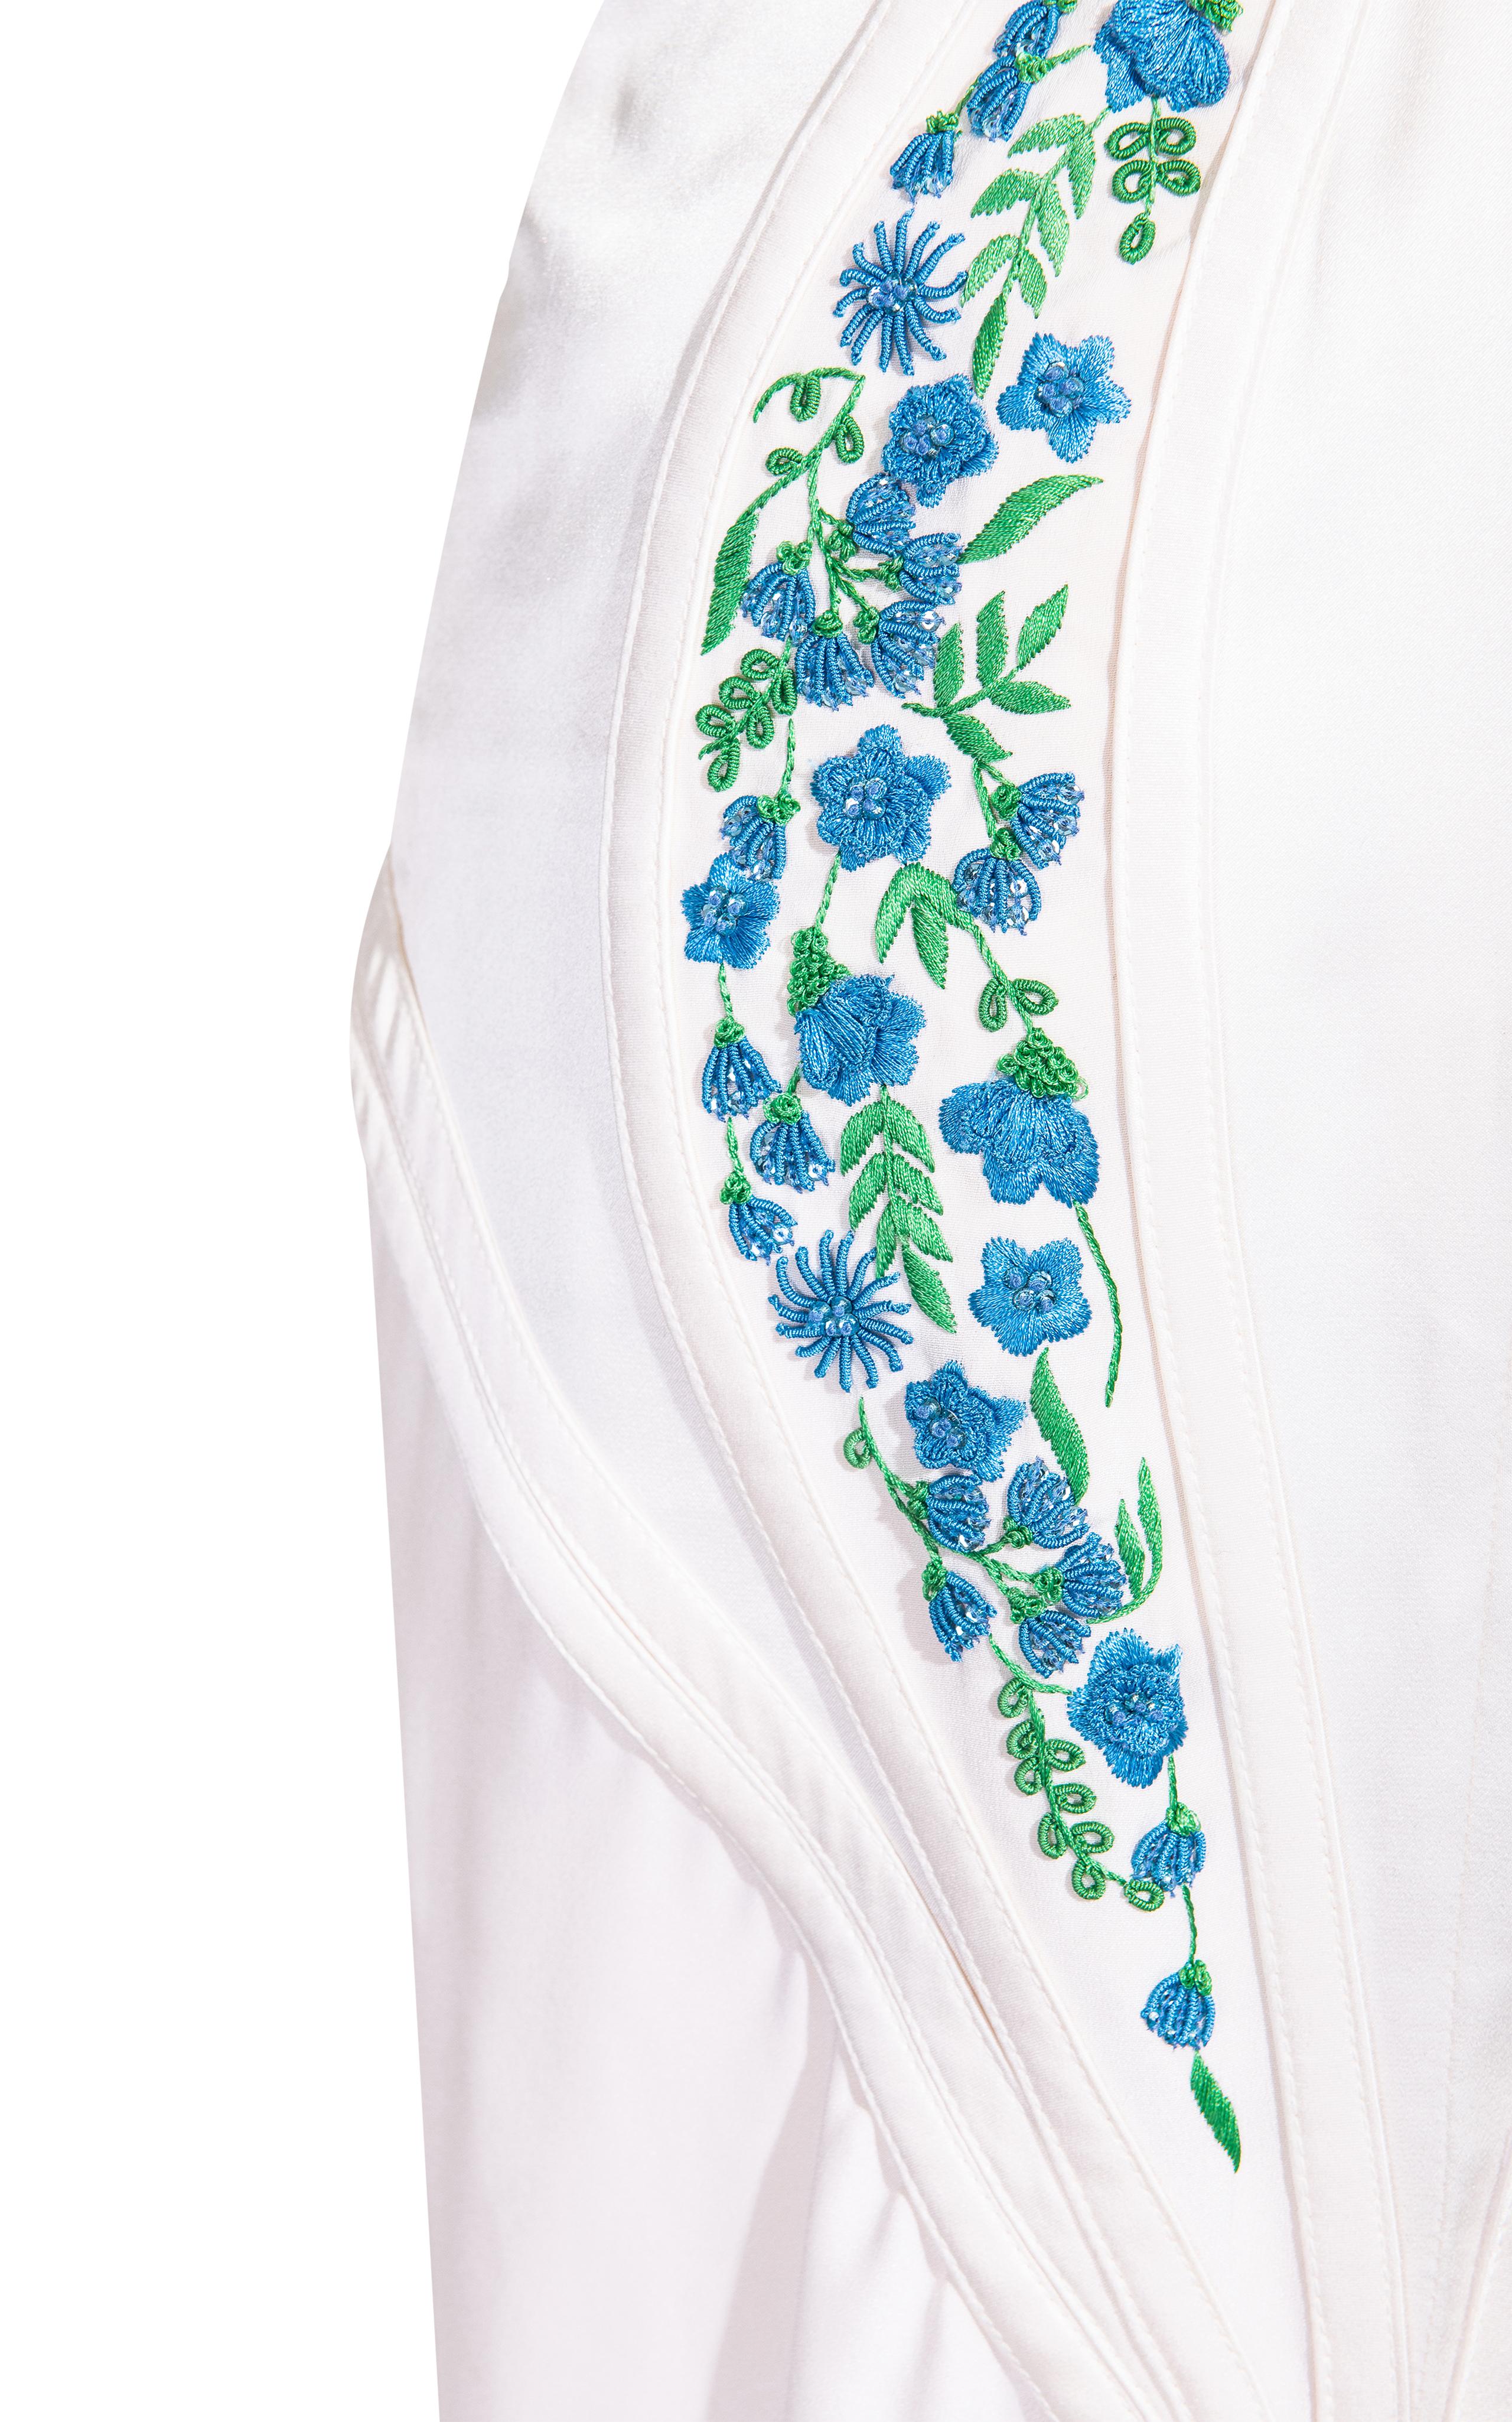 2000's Atelier Versace White Gown with Colorful Floral Embroidery 1